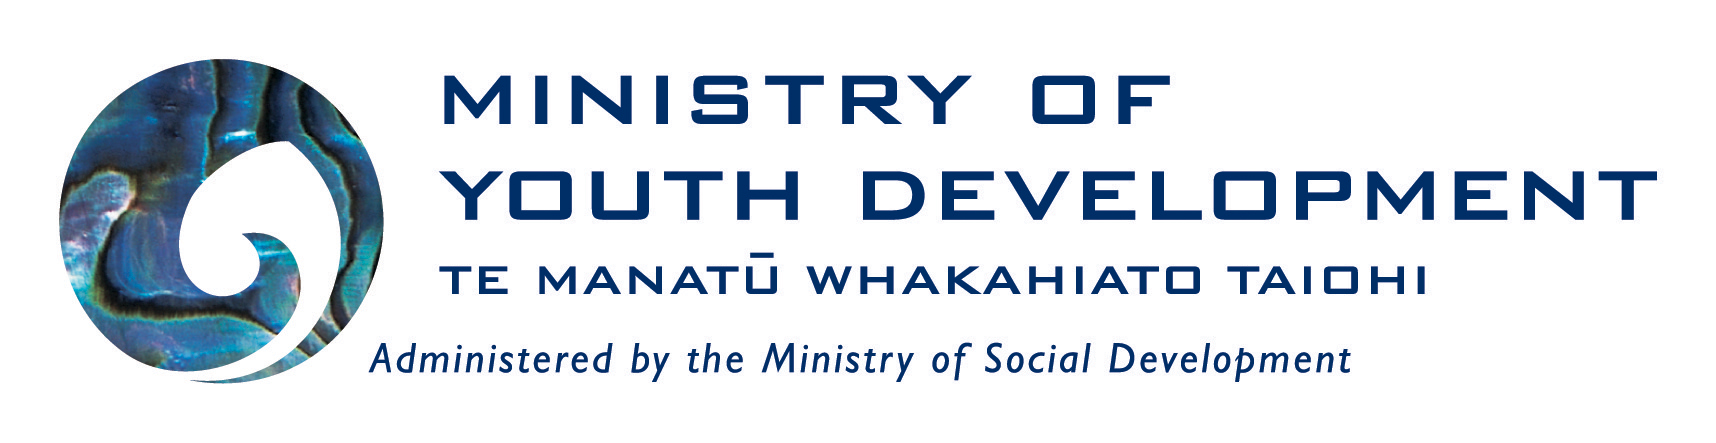 Ministry of Youth Development logo in full colour with paua icon